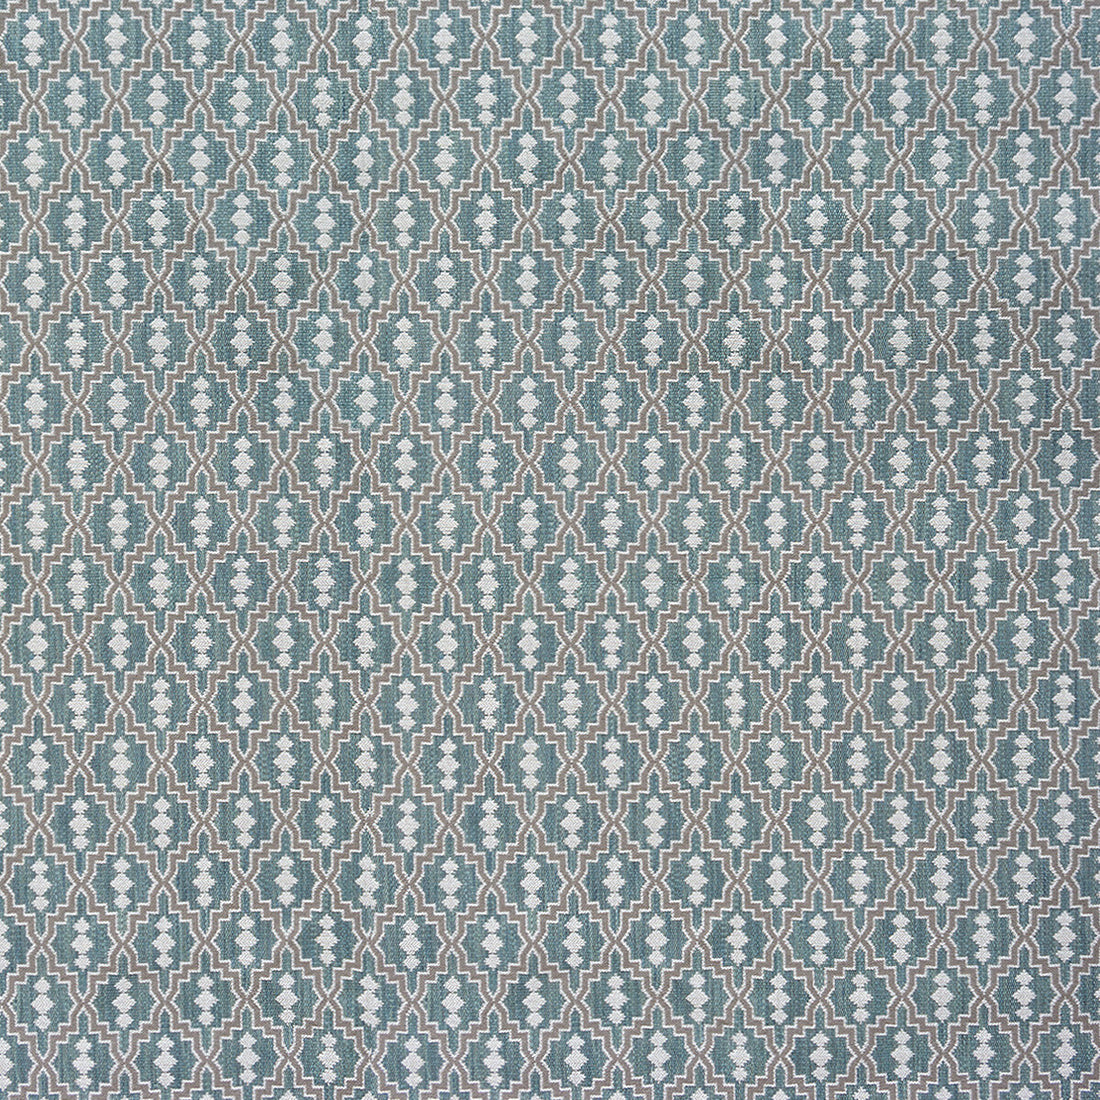 Aztec fabric in agua color - pattern GDT5152.010.0 - by Gaston y Daniela in the Gaston Rio Grande collection